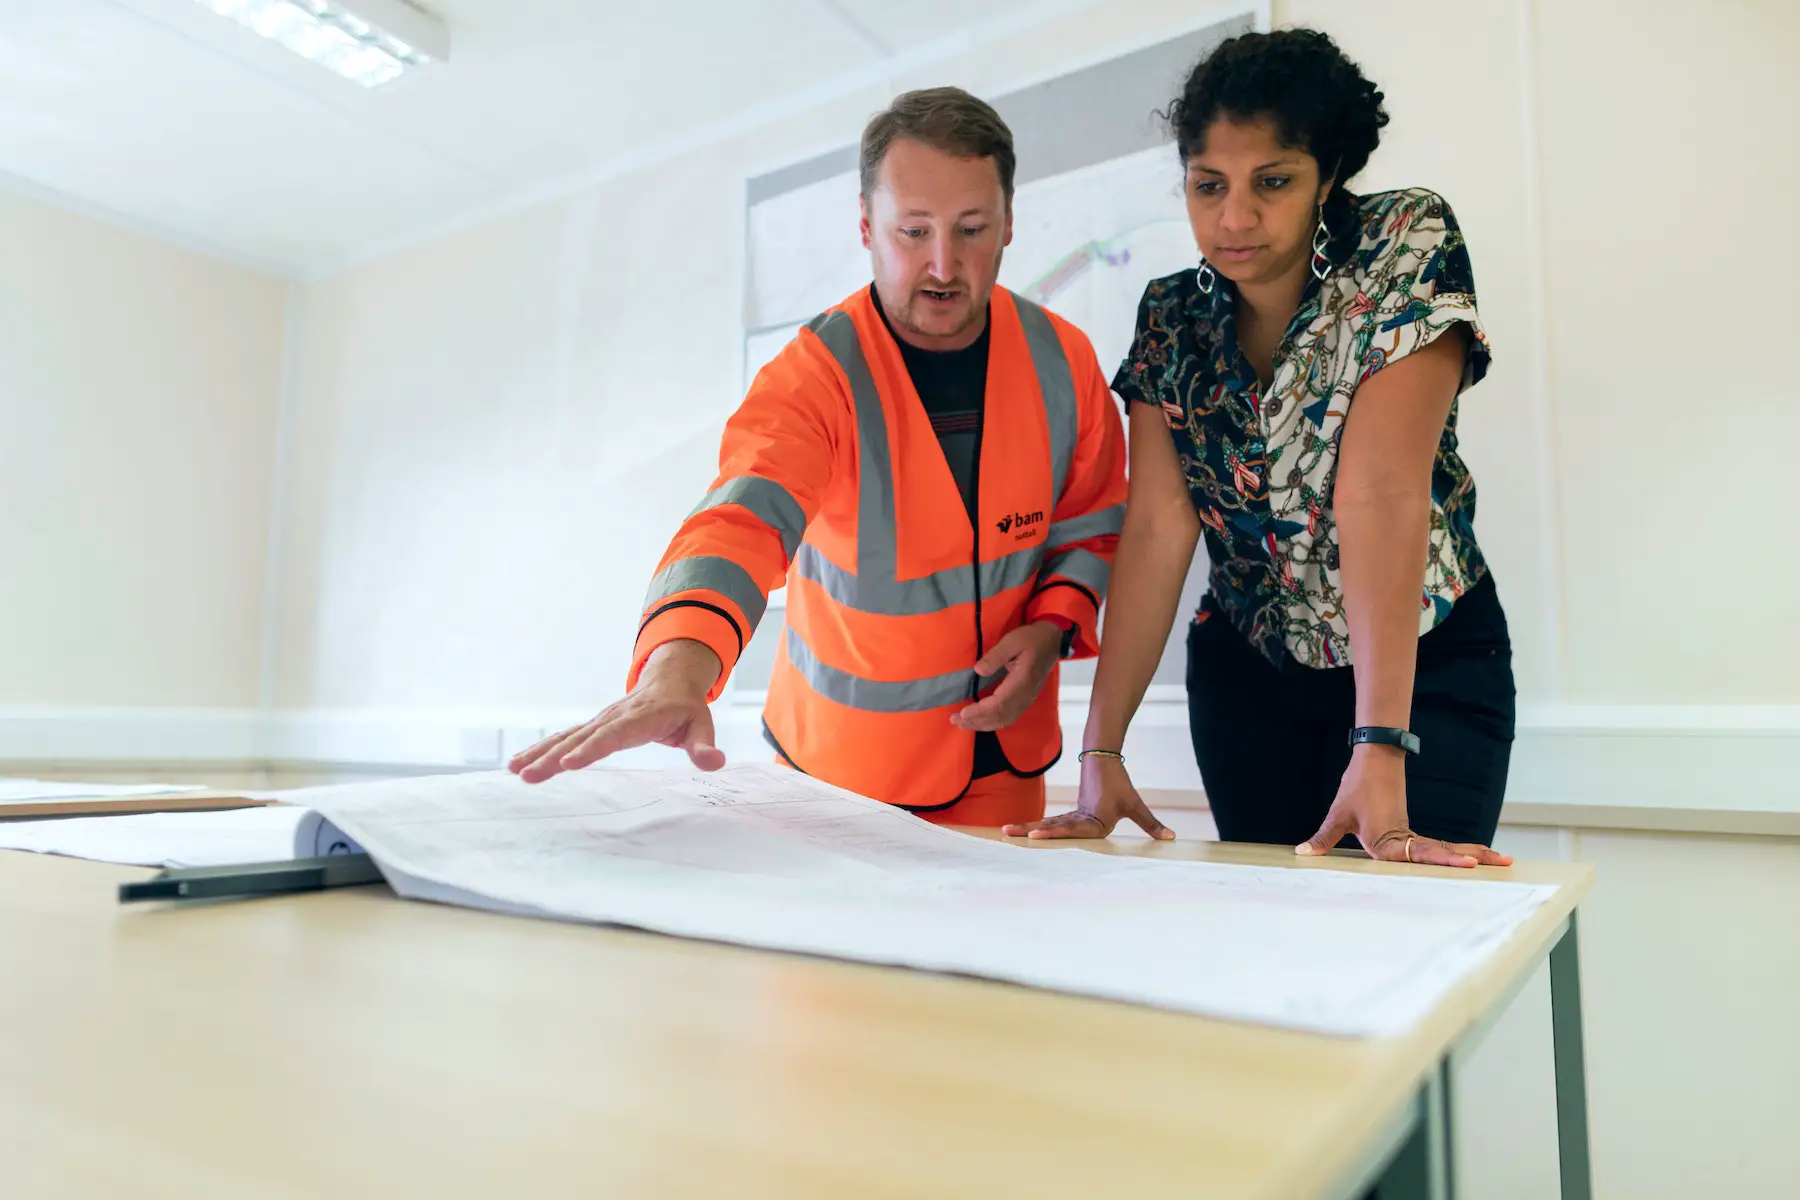 A man and woman standing over a table looking at a civil engineering work plan. He wears a construction jacket and she wears business attire.